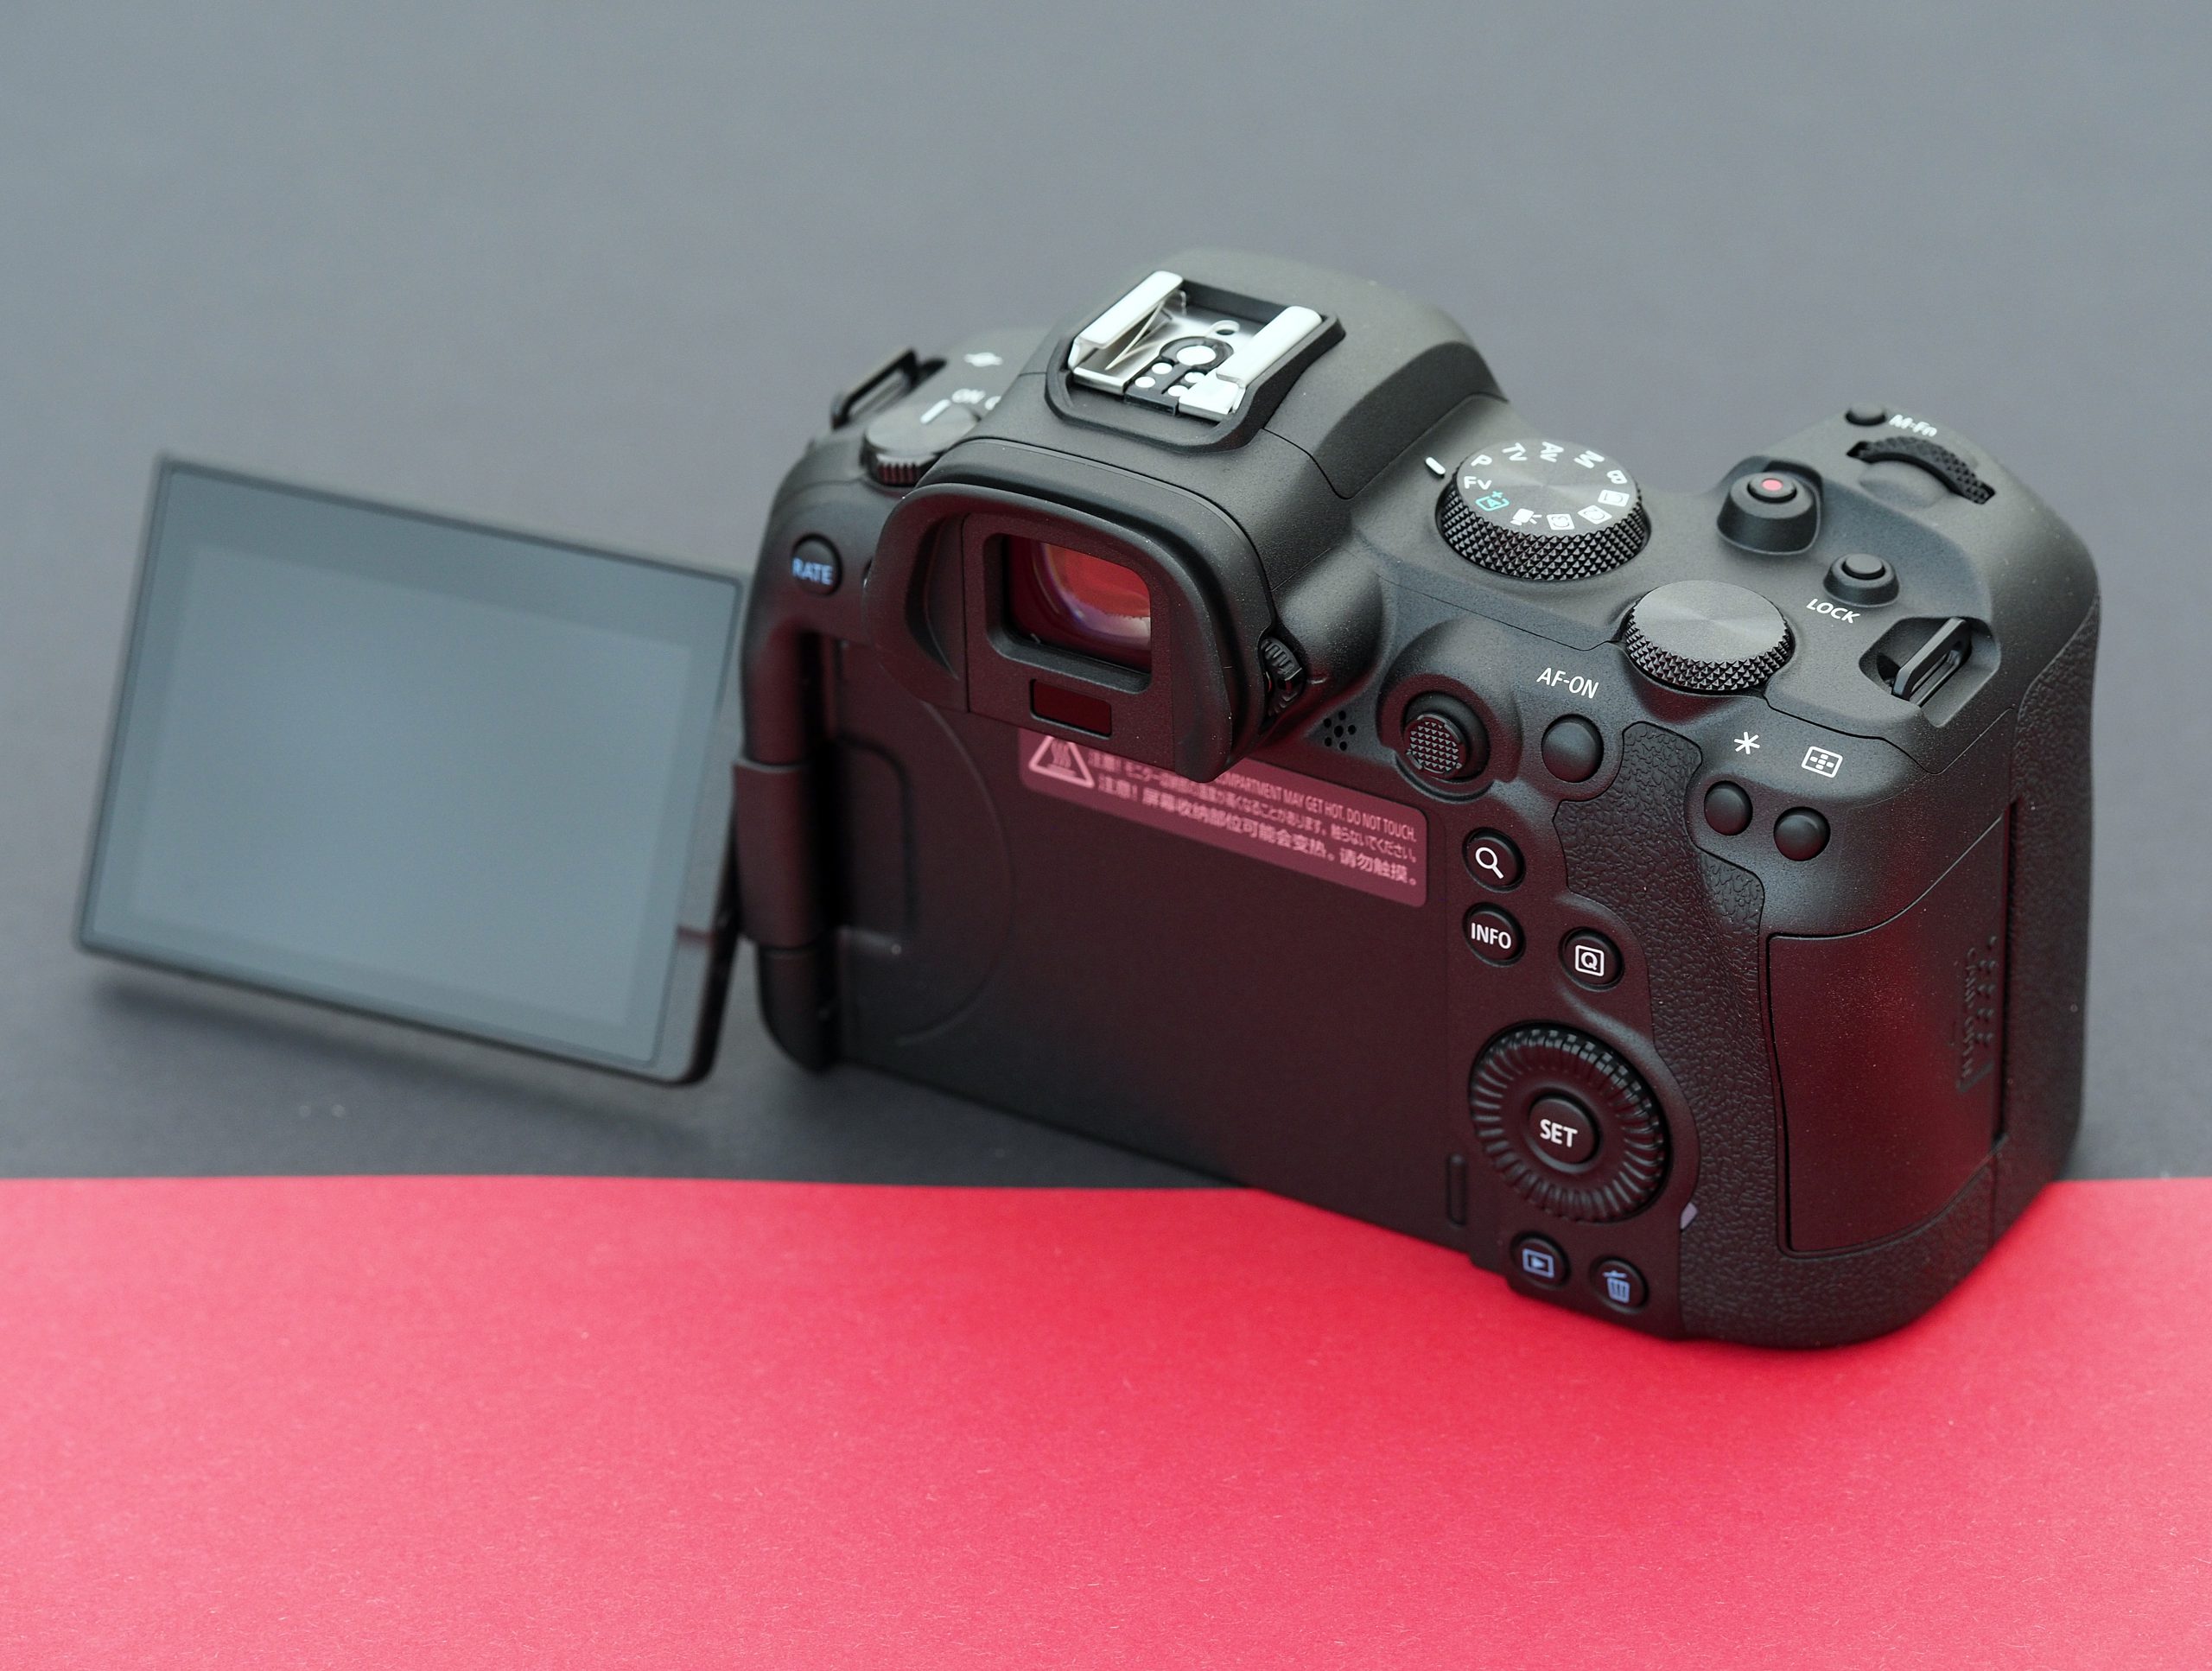 Canon R6 offers solid still performance in a compact body - Photofocus